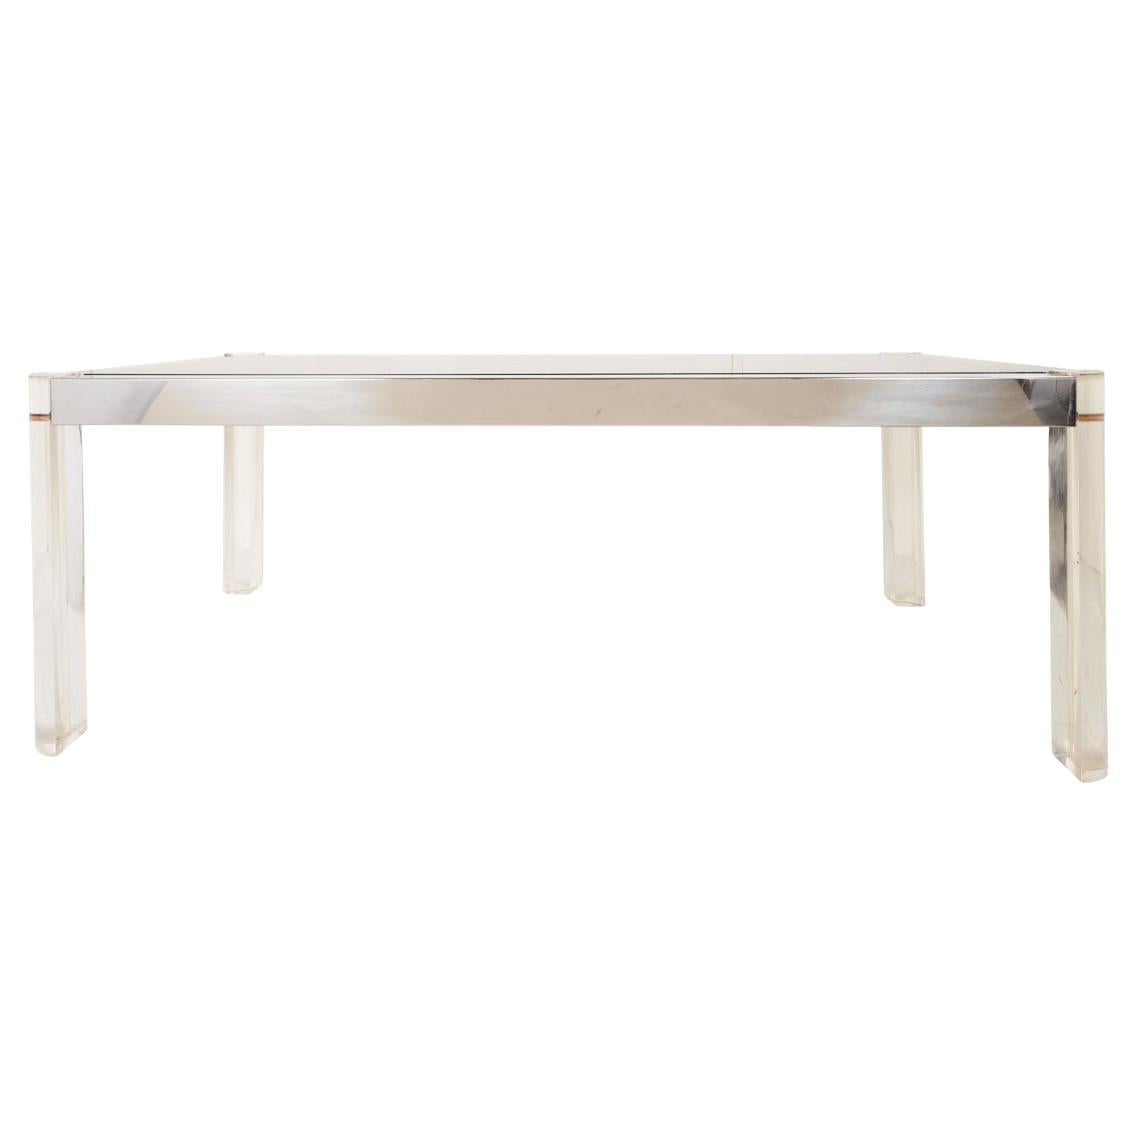 1970s Lucite and Chrome Dining Table with Glass Top, Italy